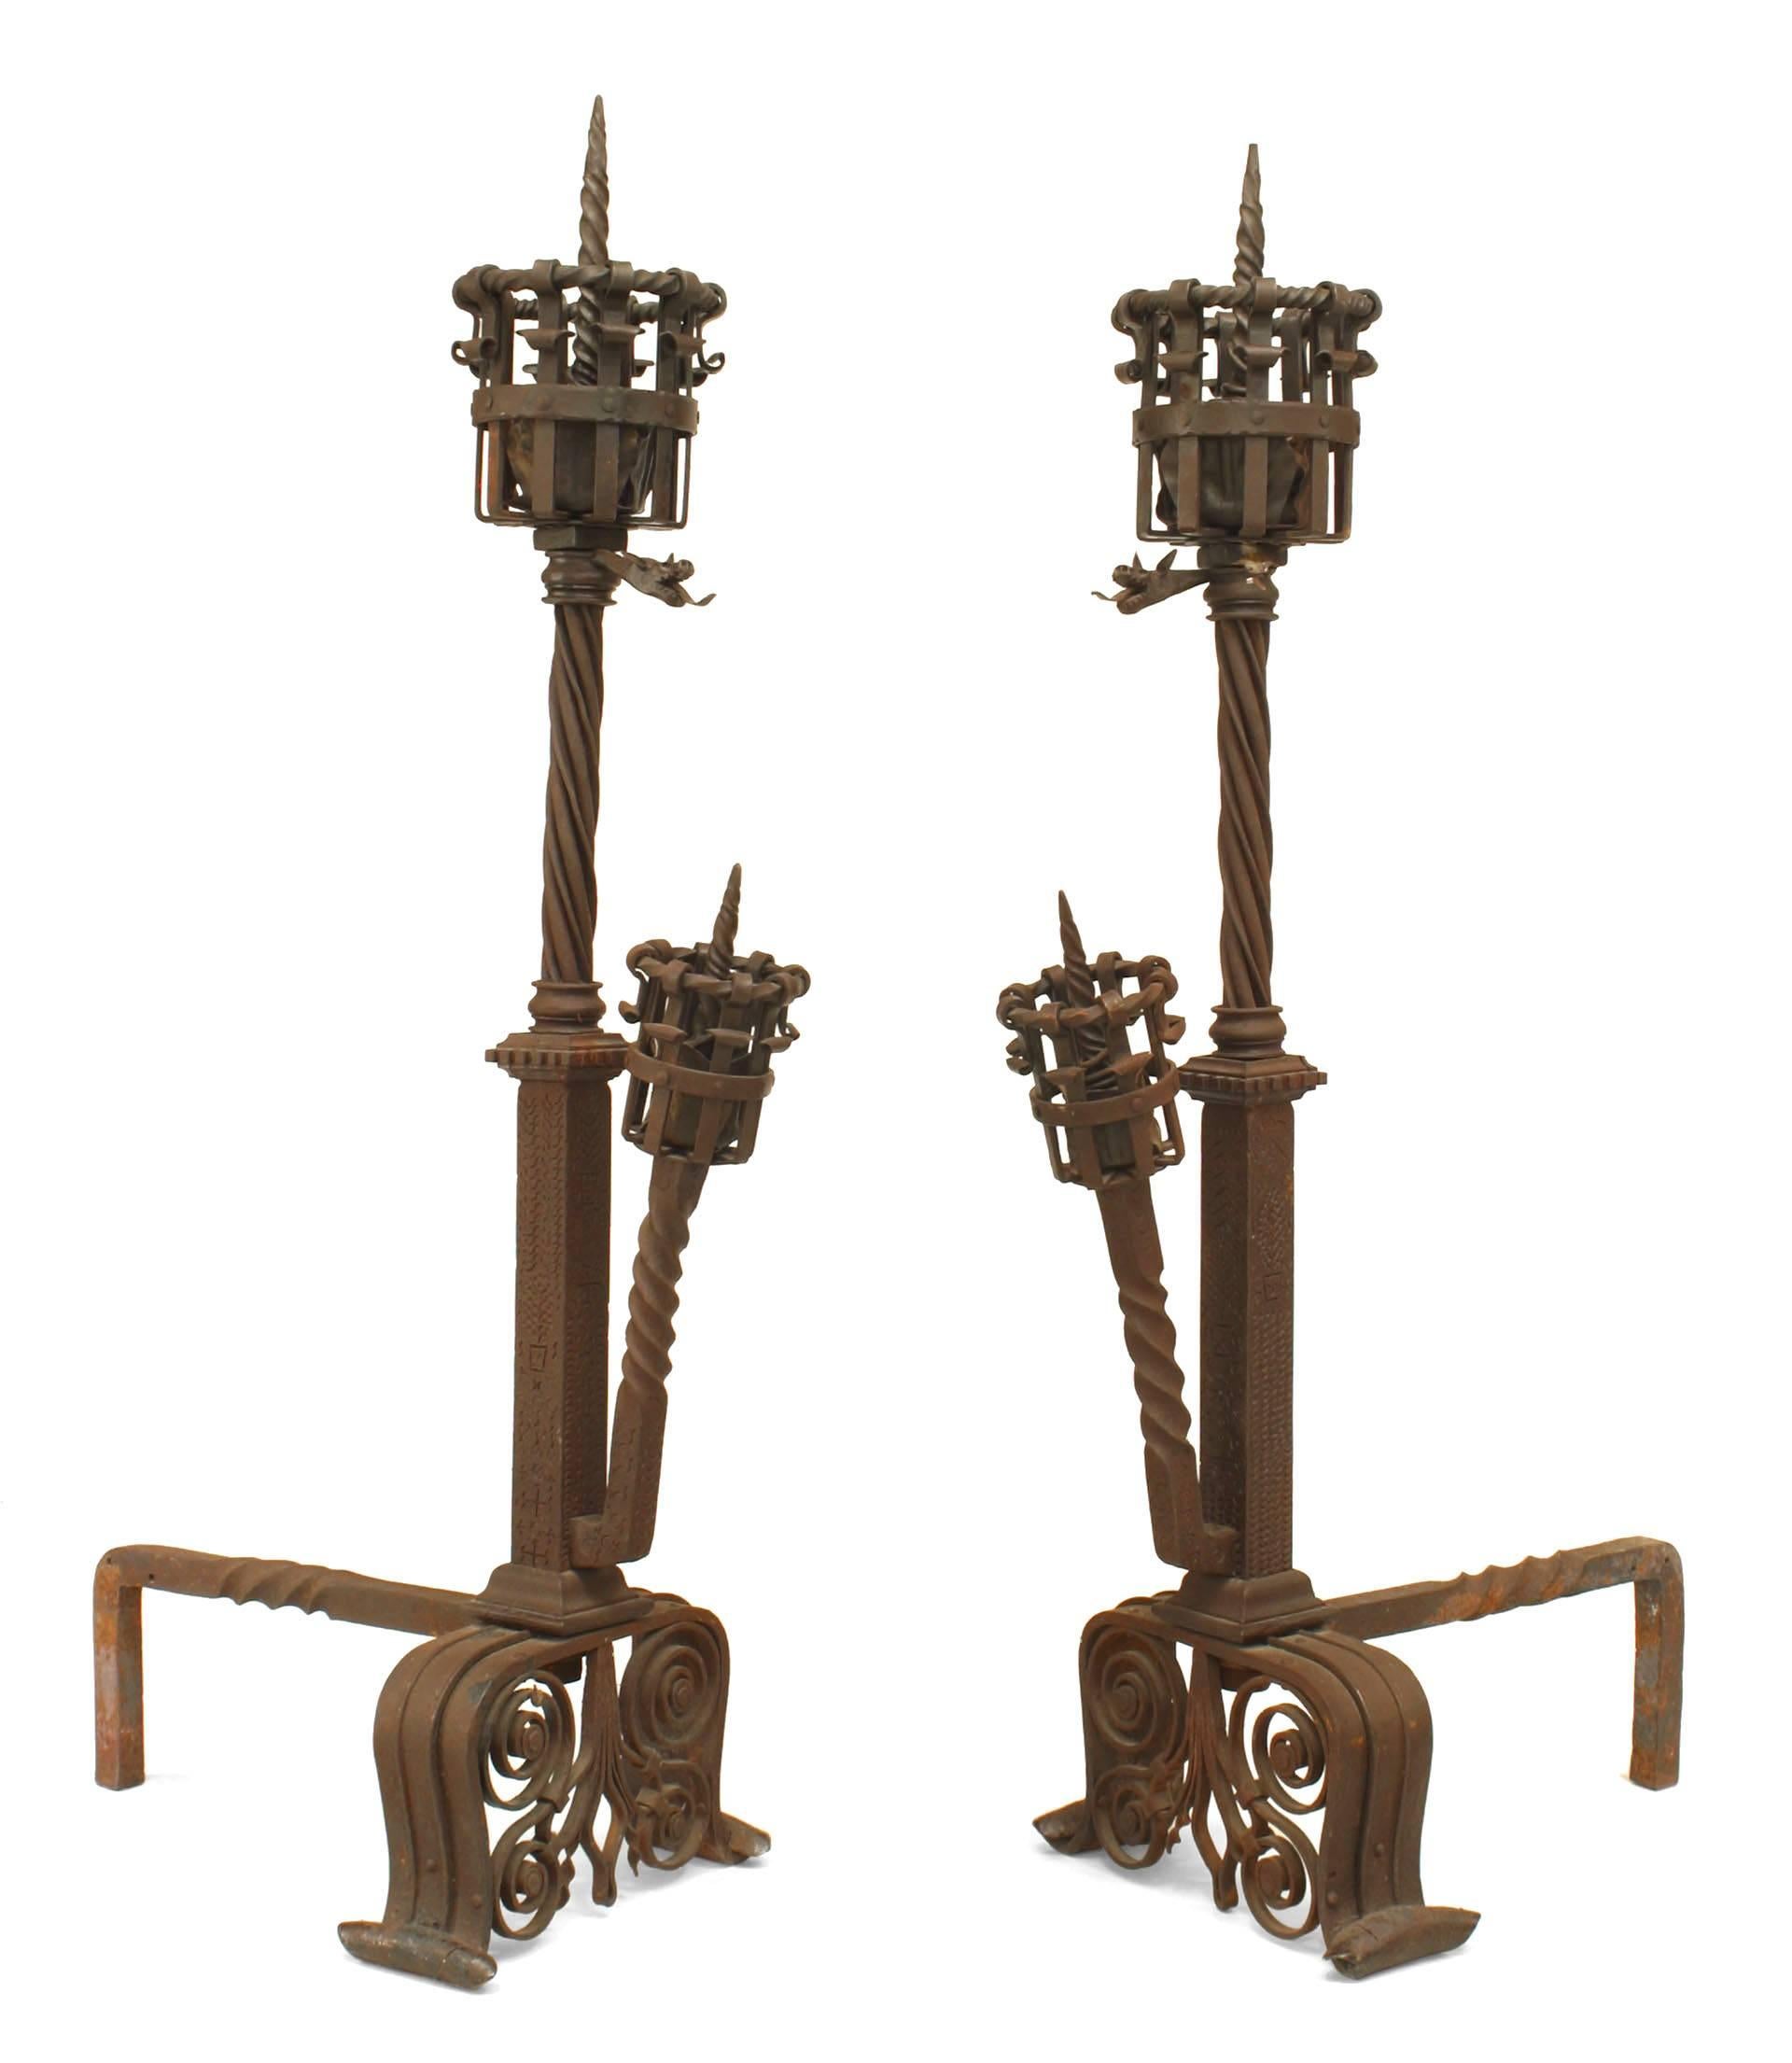 Pair of Italian Renaissance-style wrought iron andirons with an upper and lower spike & basket design with open scroll base & griffins supporting a cross bar (Attributed to SAMUEL YELLIN) (PRICED AS Pair)
